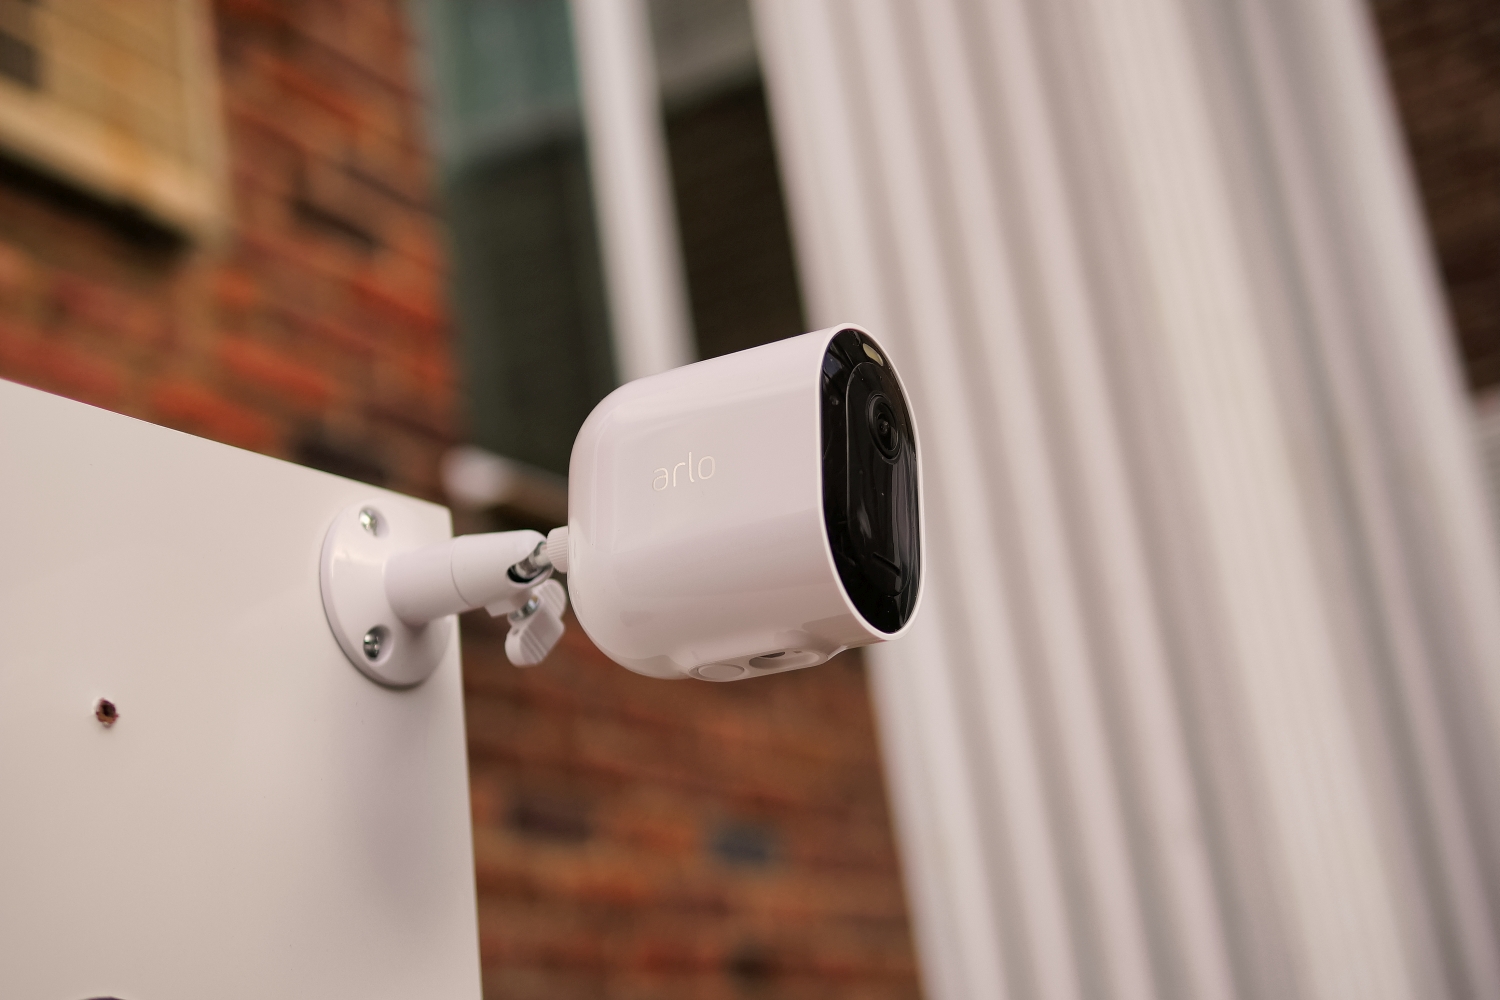 Eufy vs Arlo: which home security camera system is best for you?